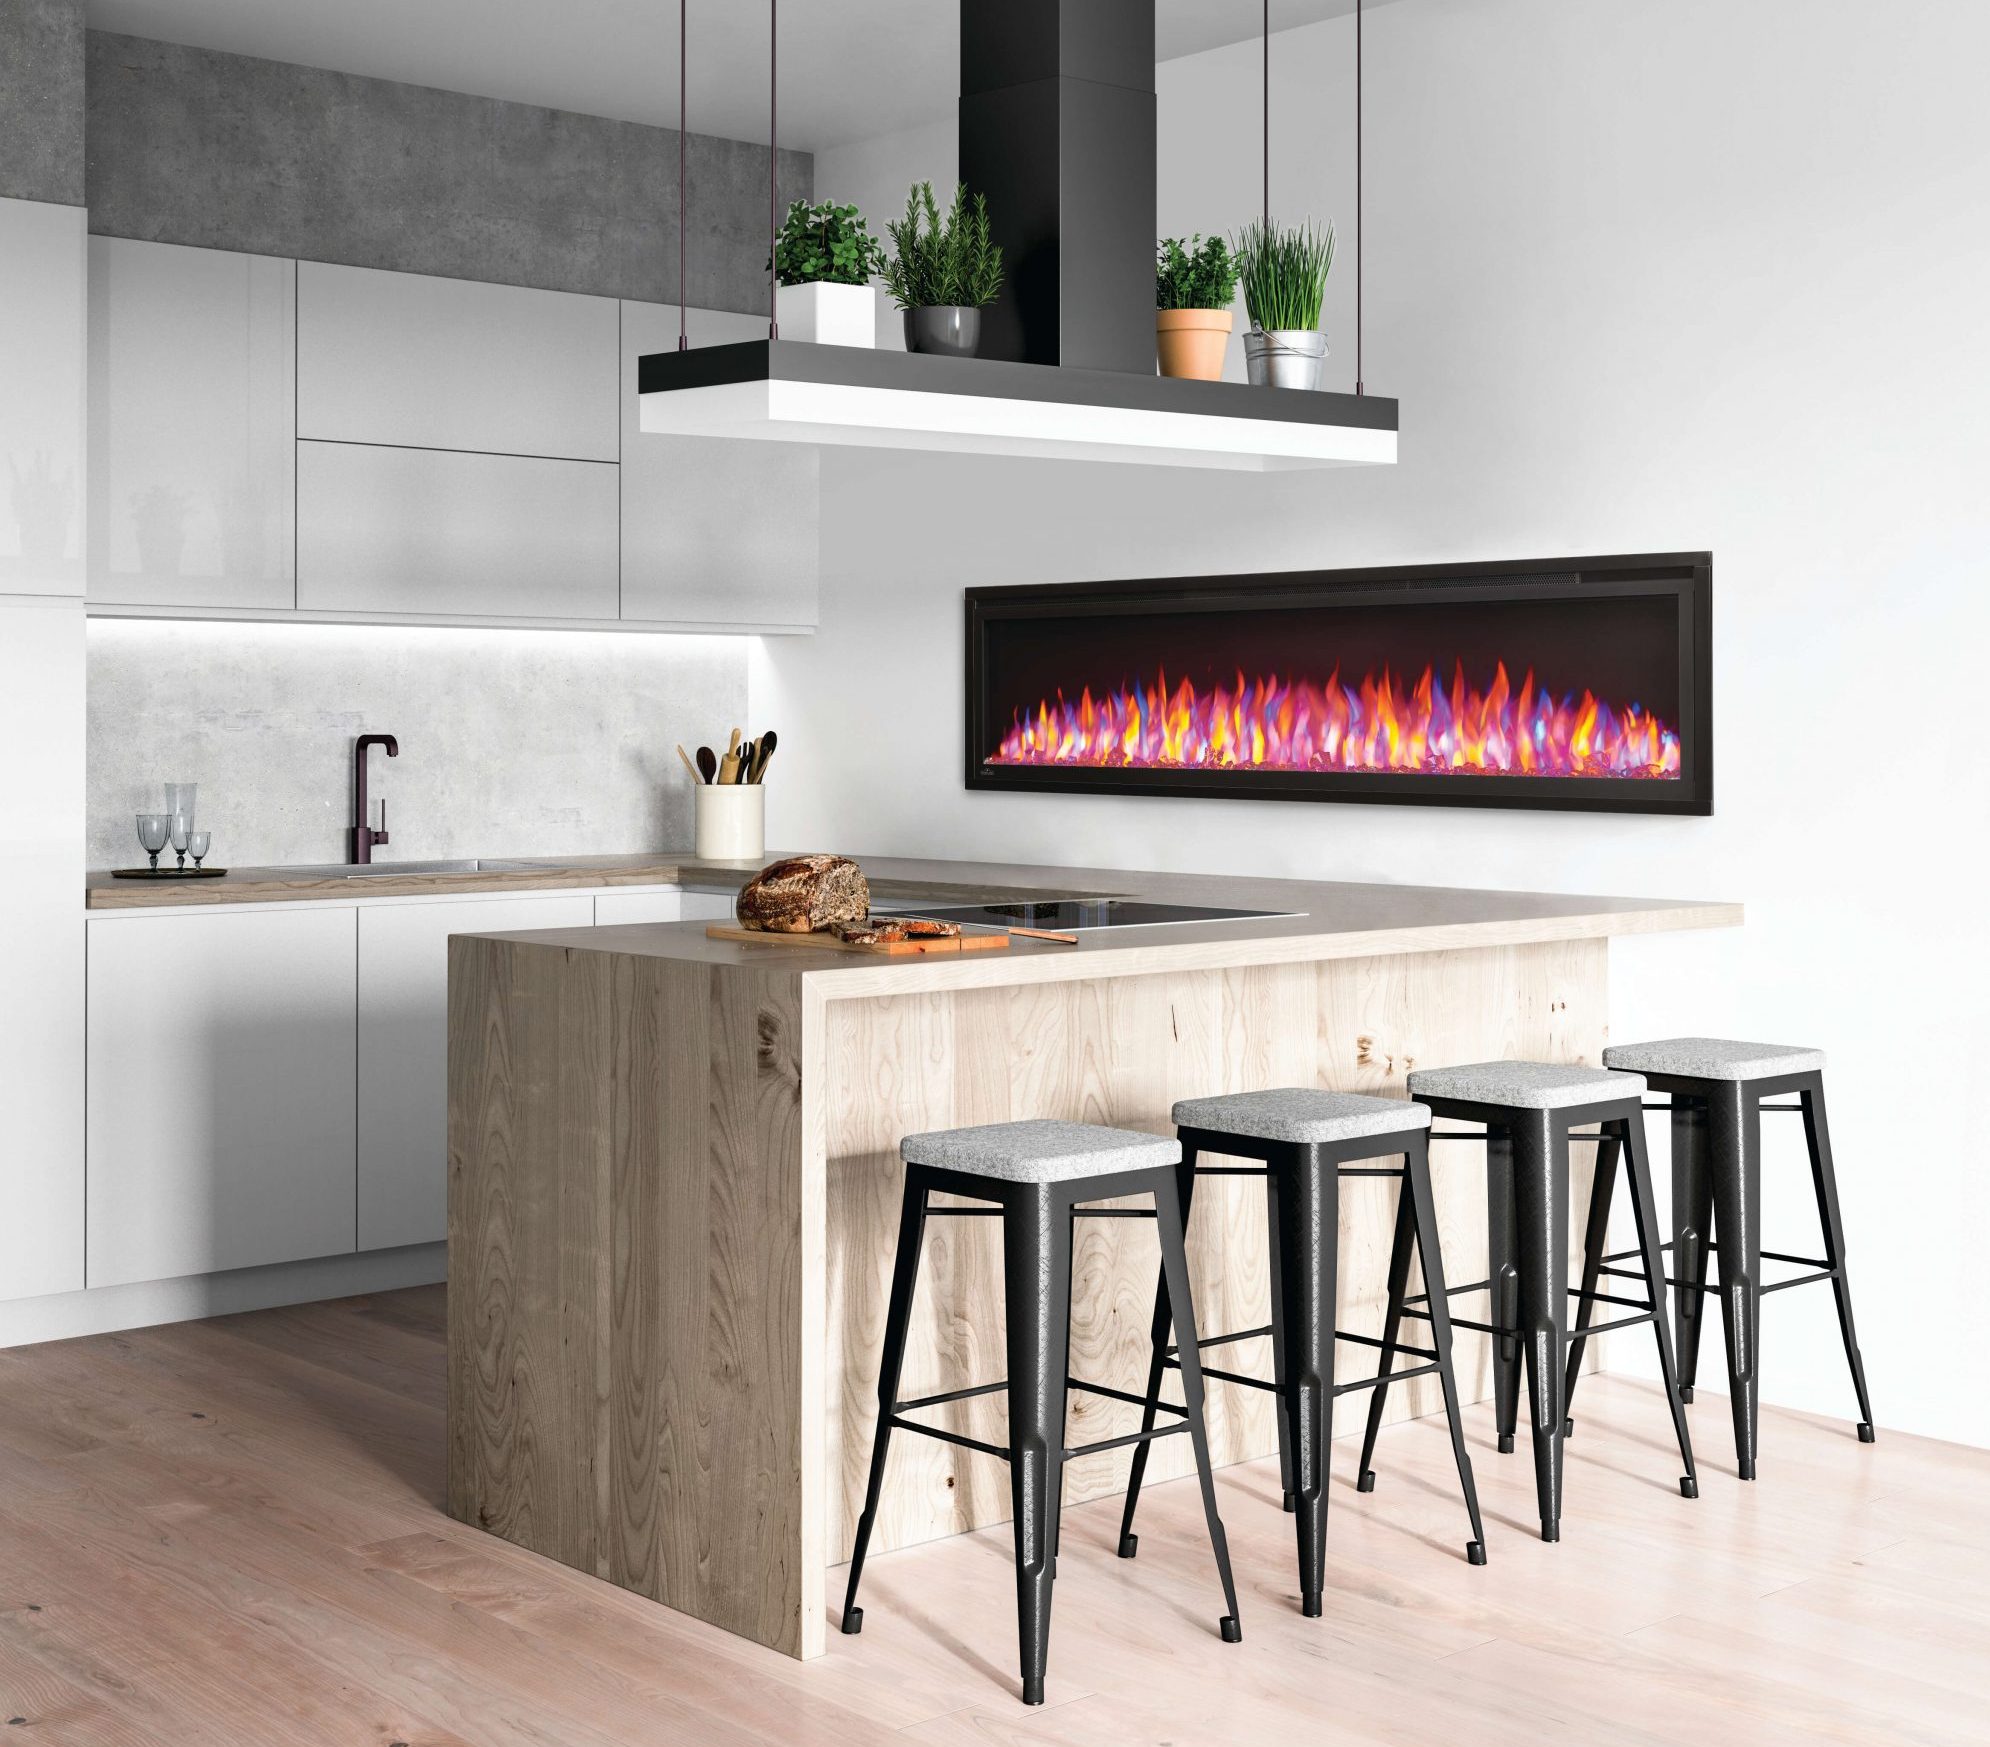 electric indoor fireplace installation in kitchen